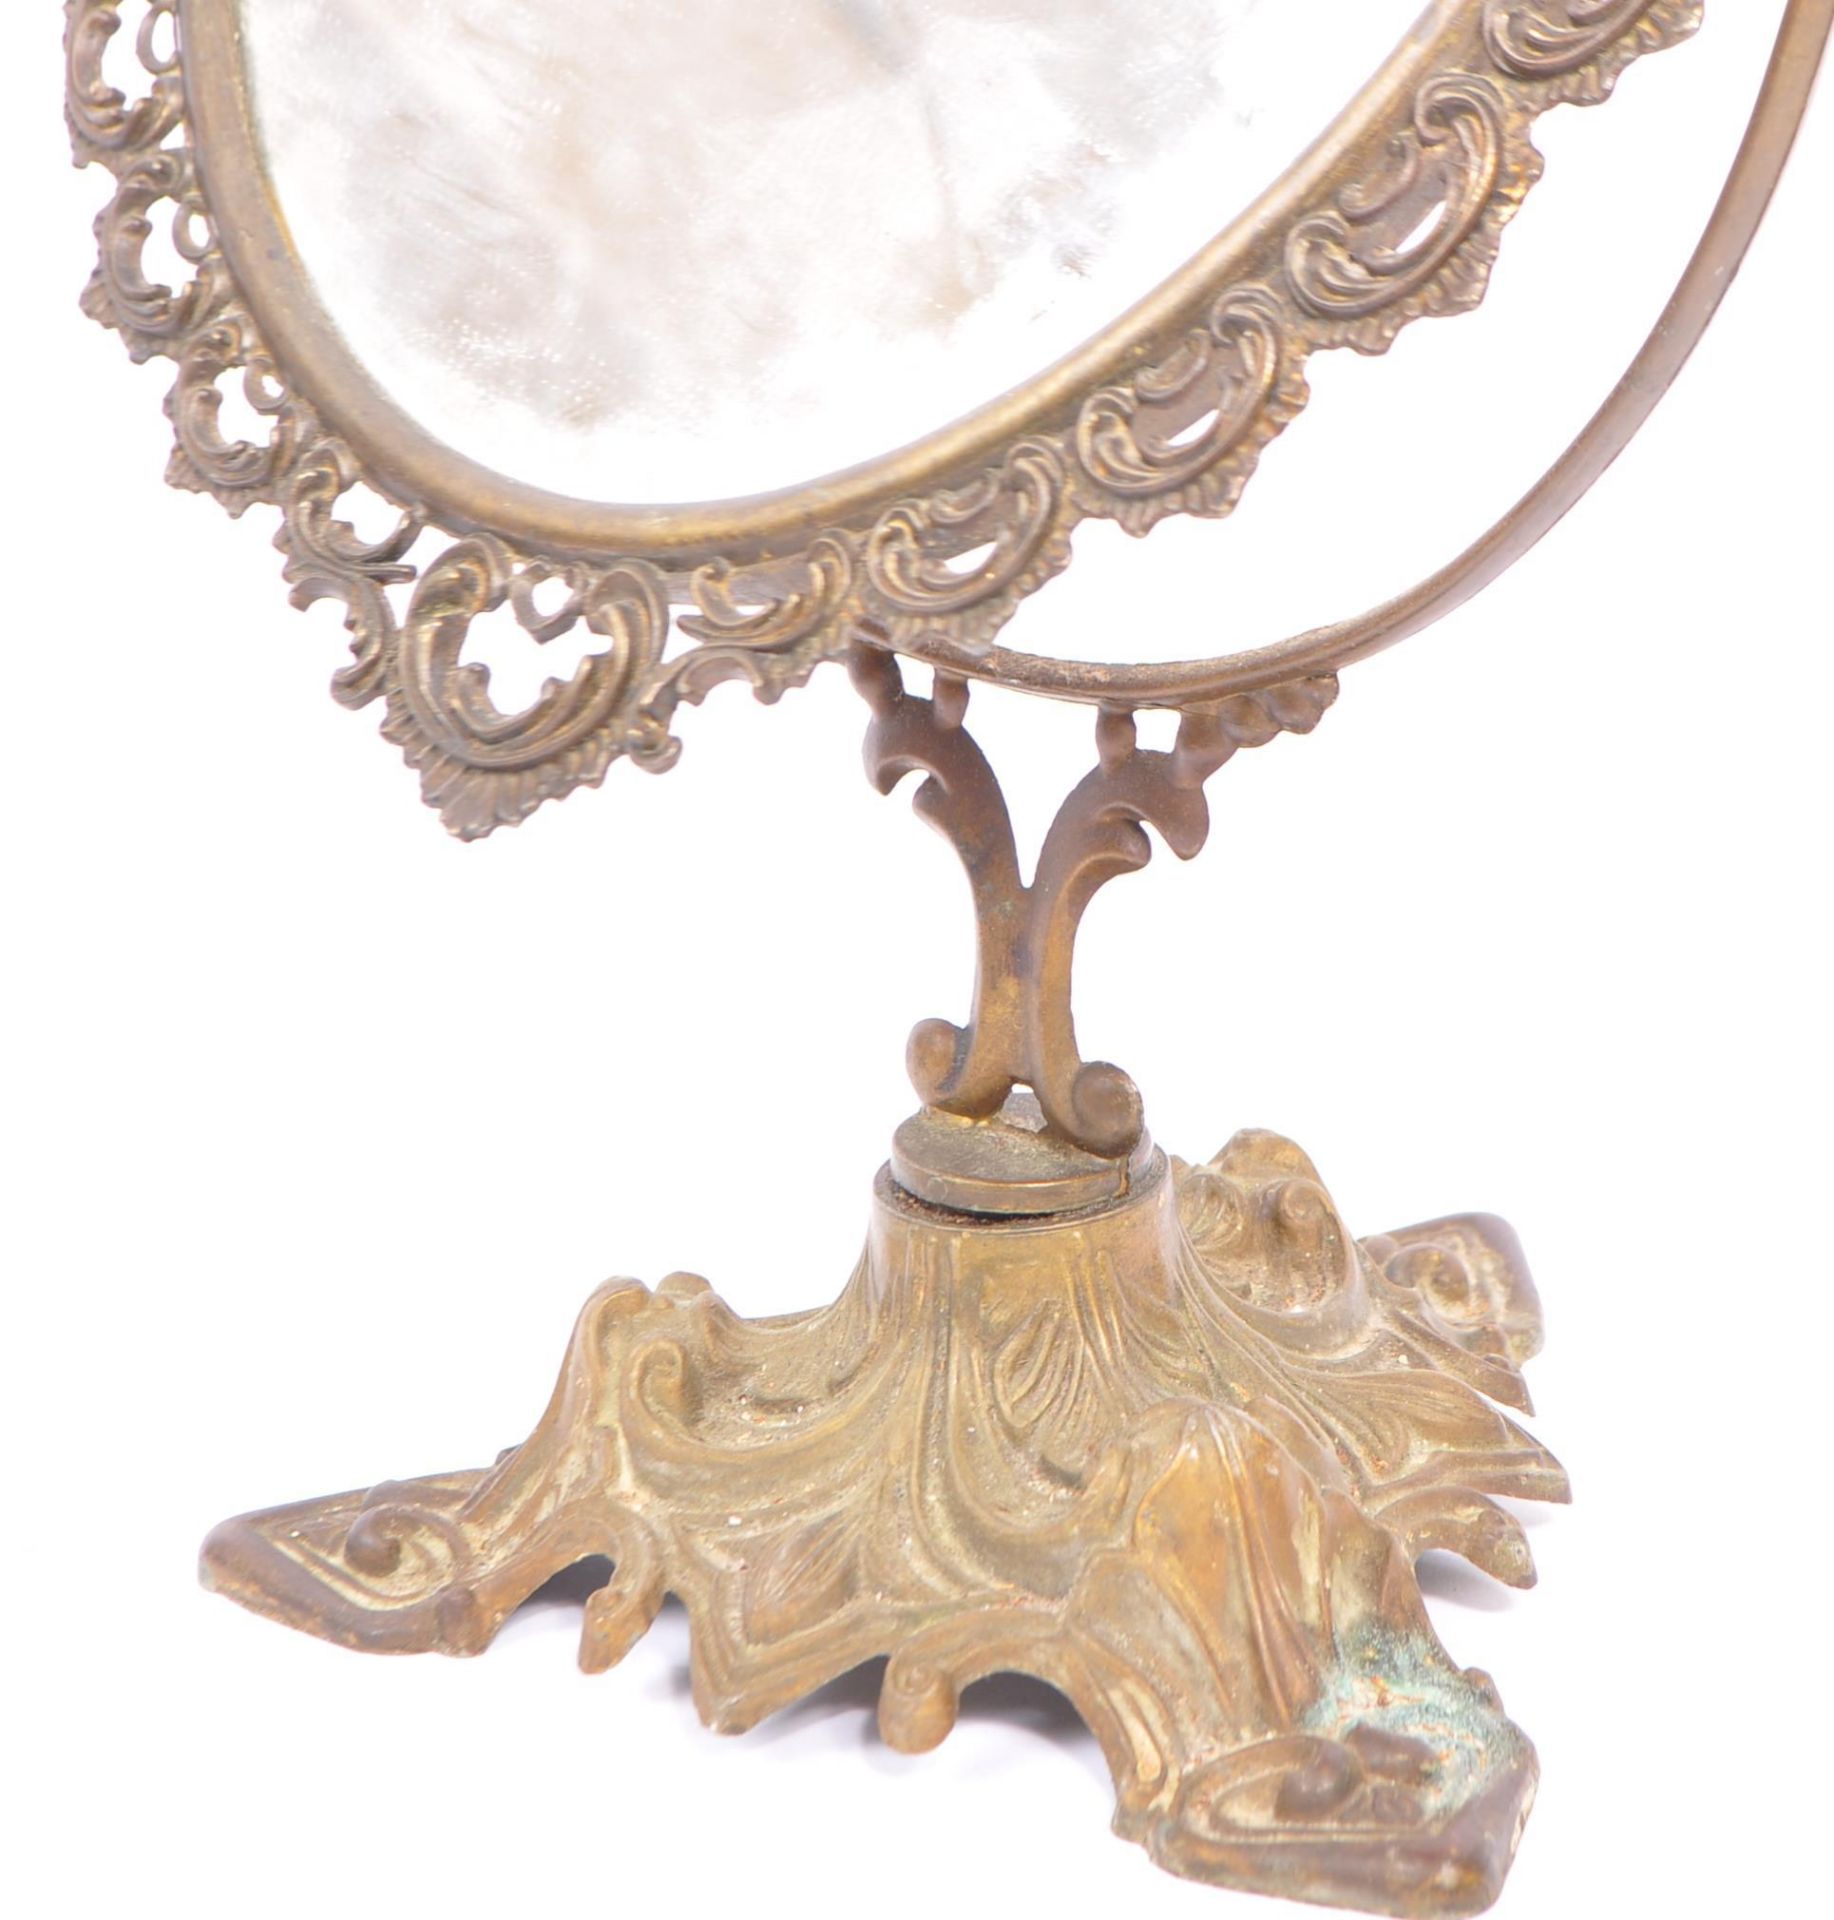 EARLY 20TH CENTURY FRENCH ROCOCO STYLE FREE STANDINGH MIRROR - Image 3 of 5